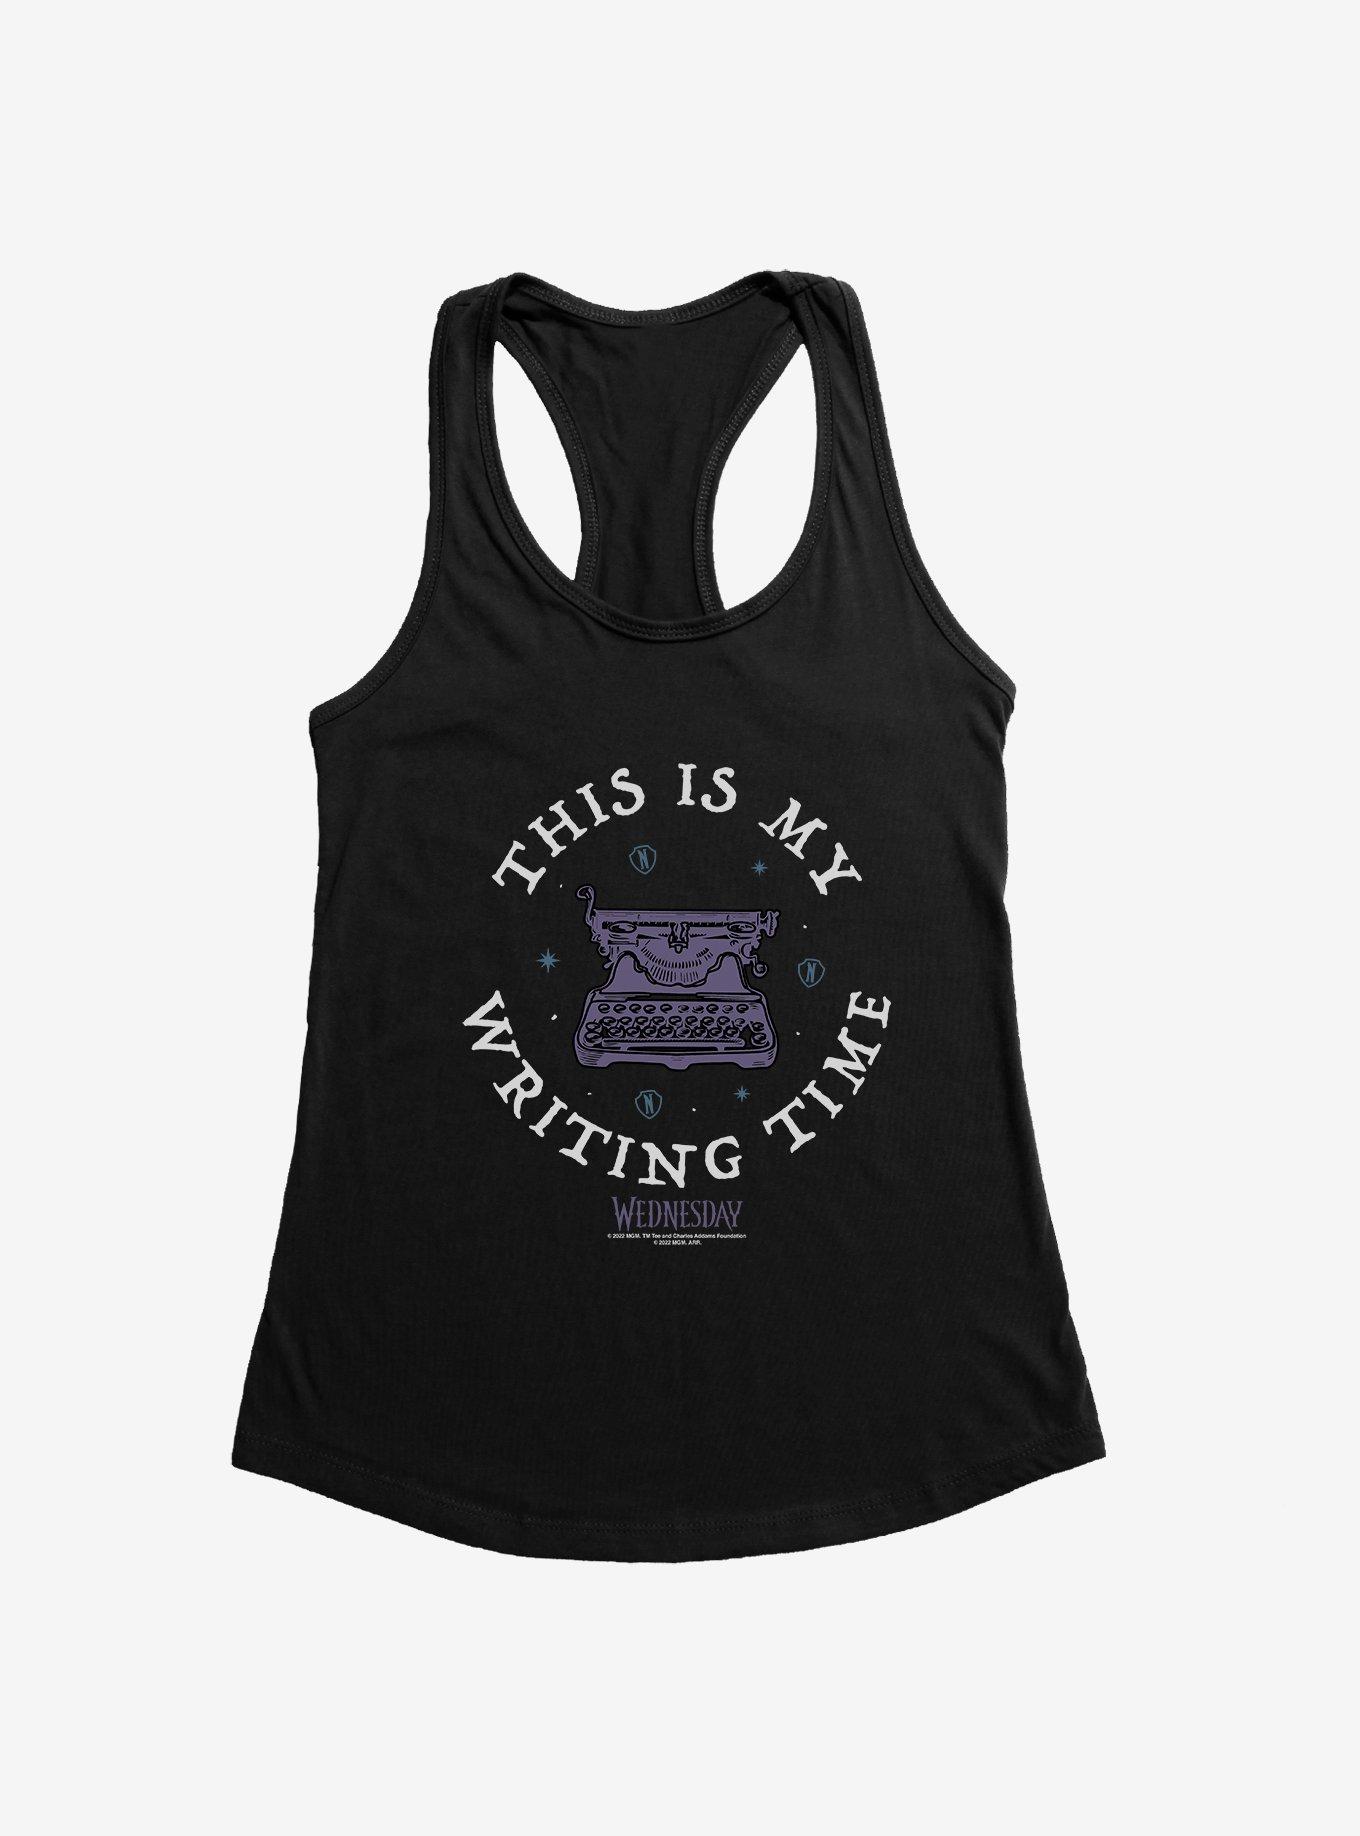 Wednesday This Is My Writing Time Girls Tank